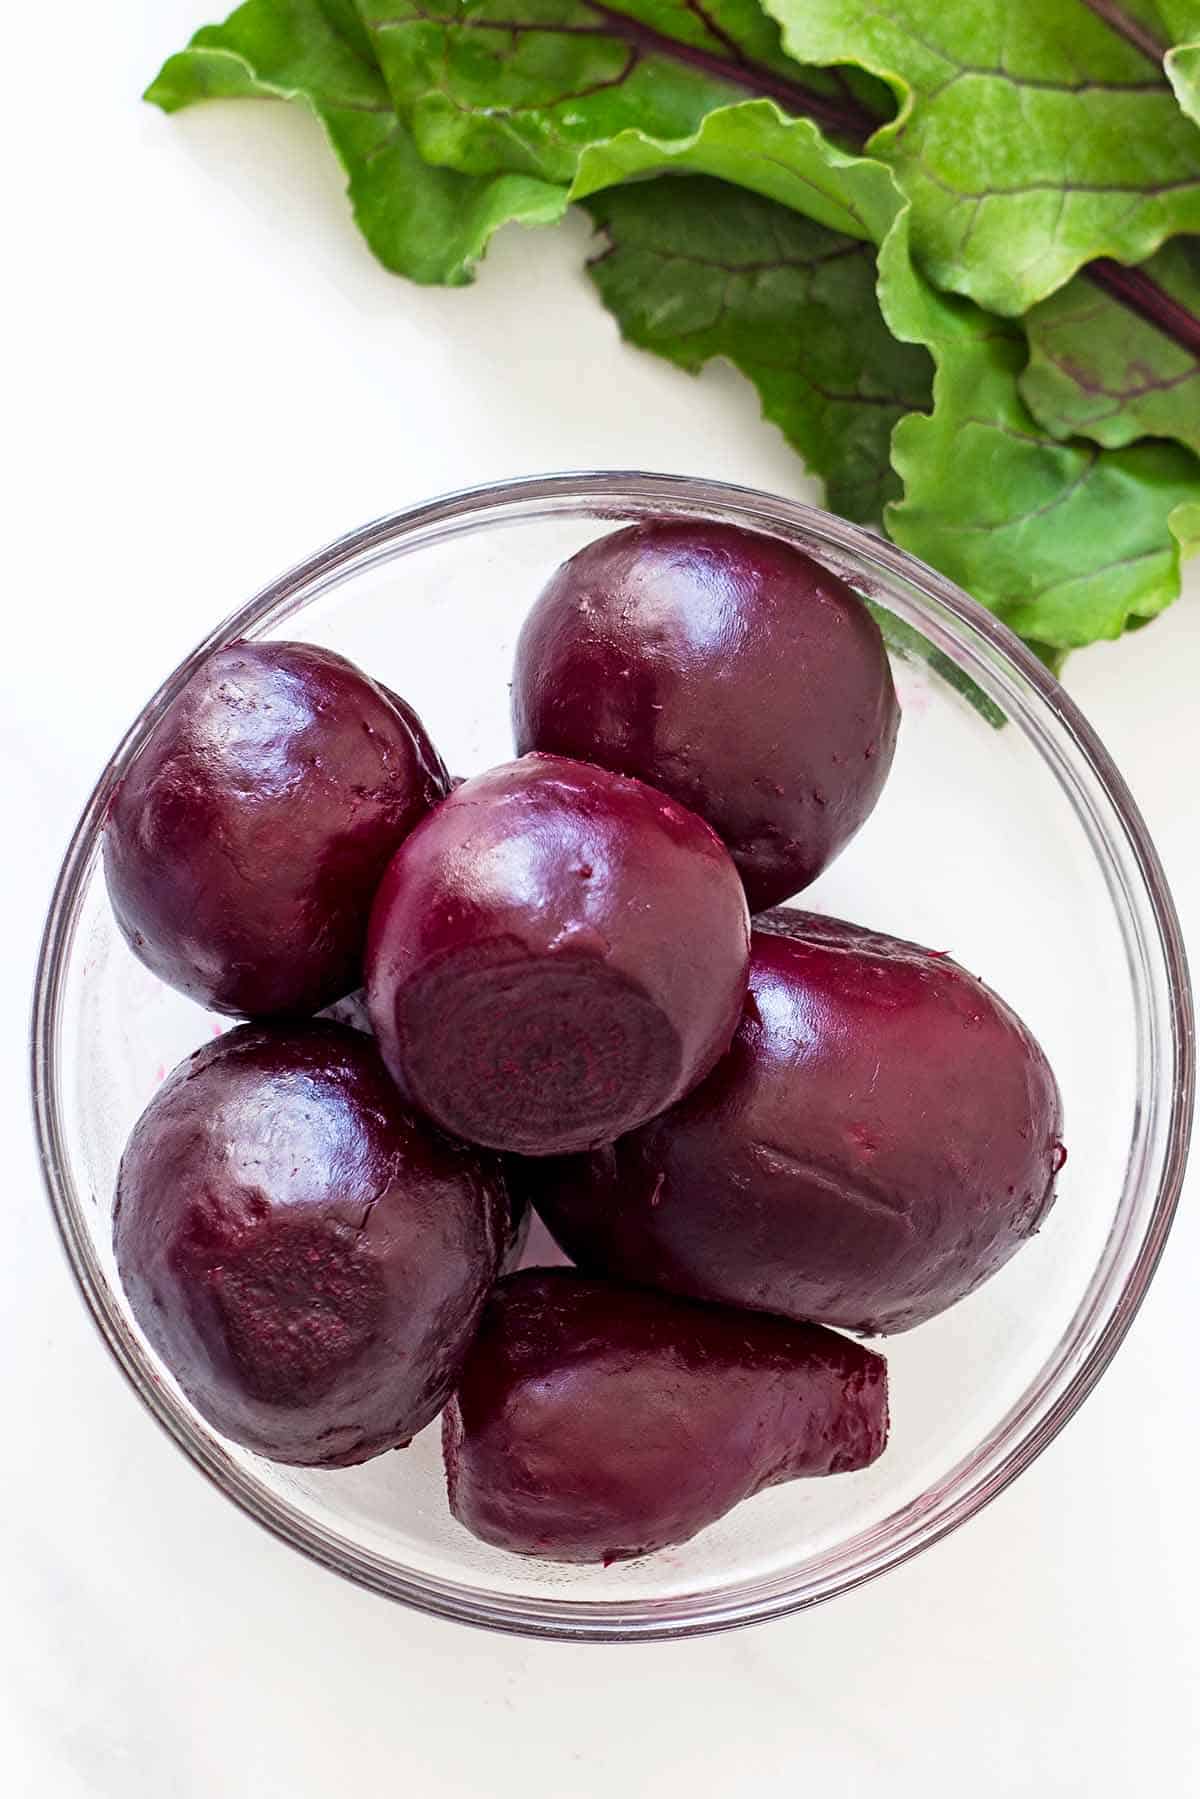 Peeled oven roasted beets in a glass bowl with beet leaves in background